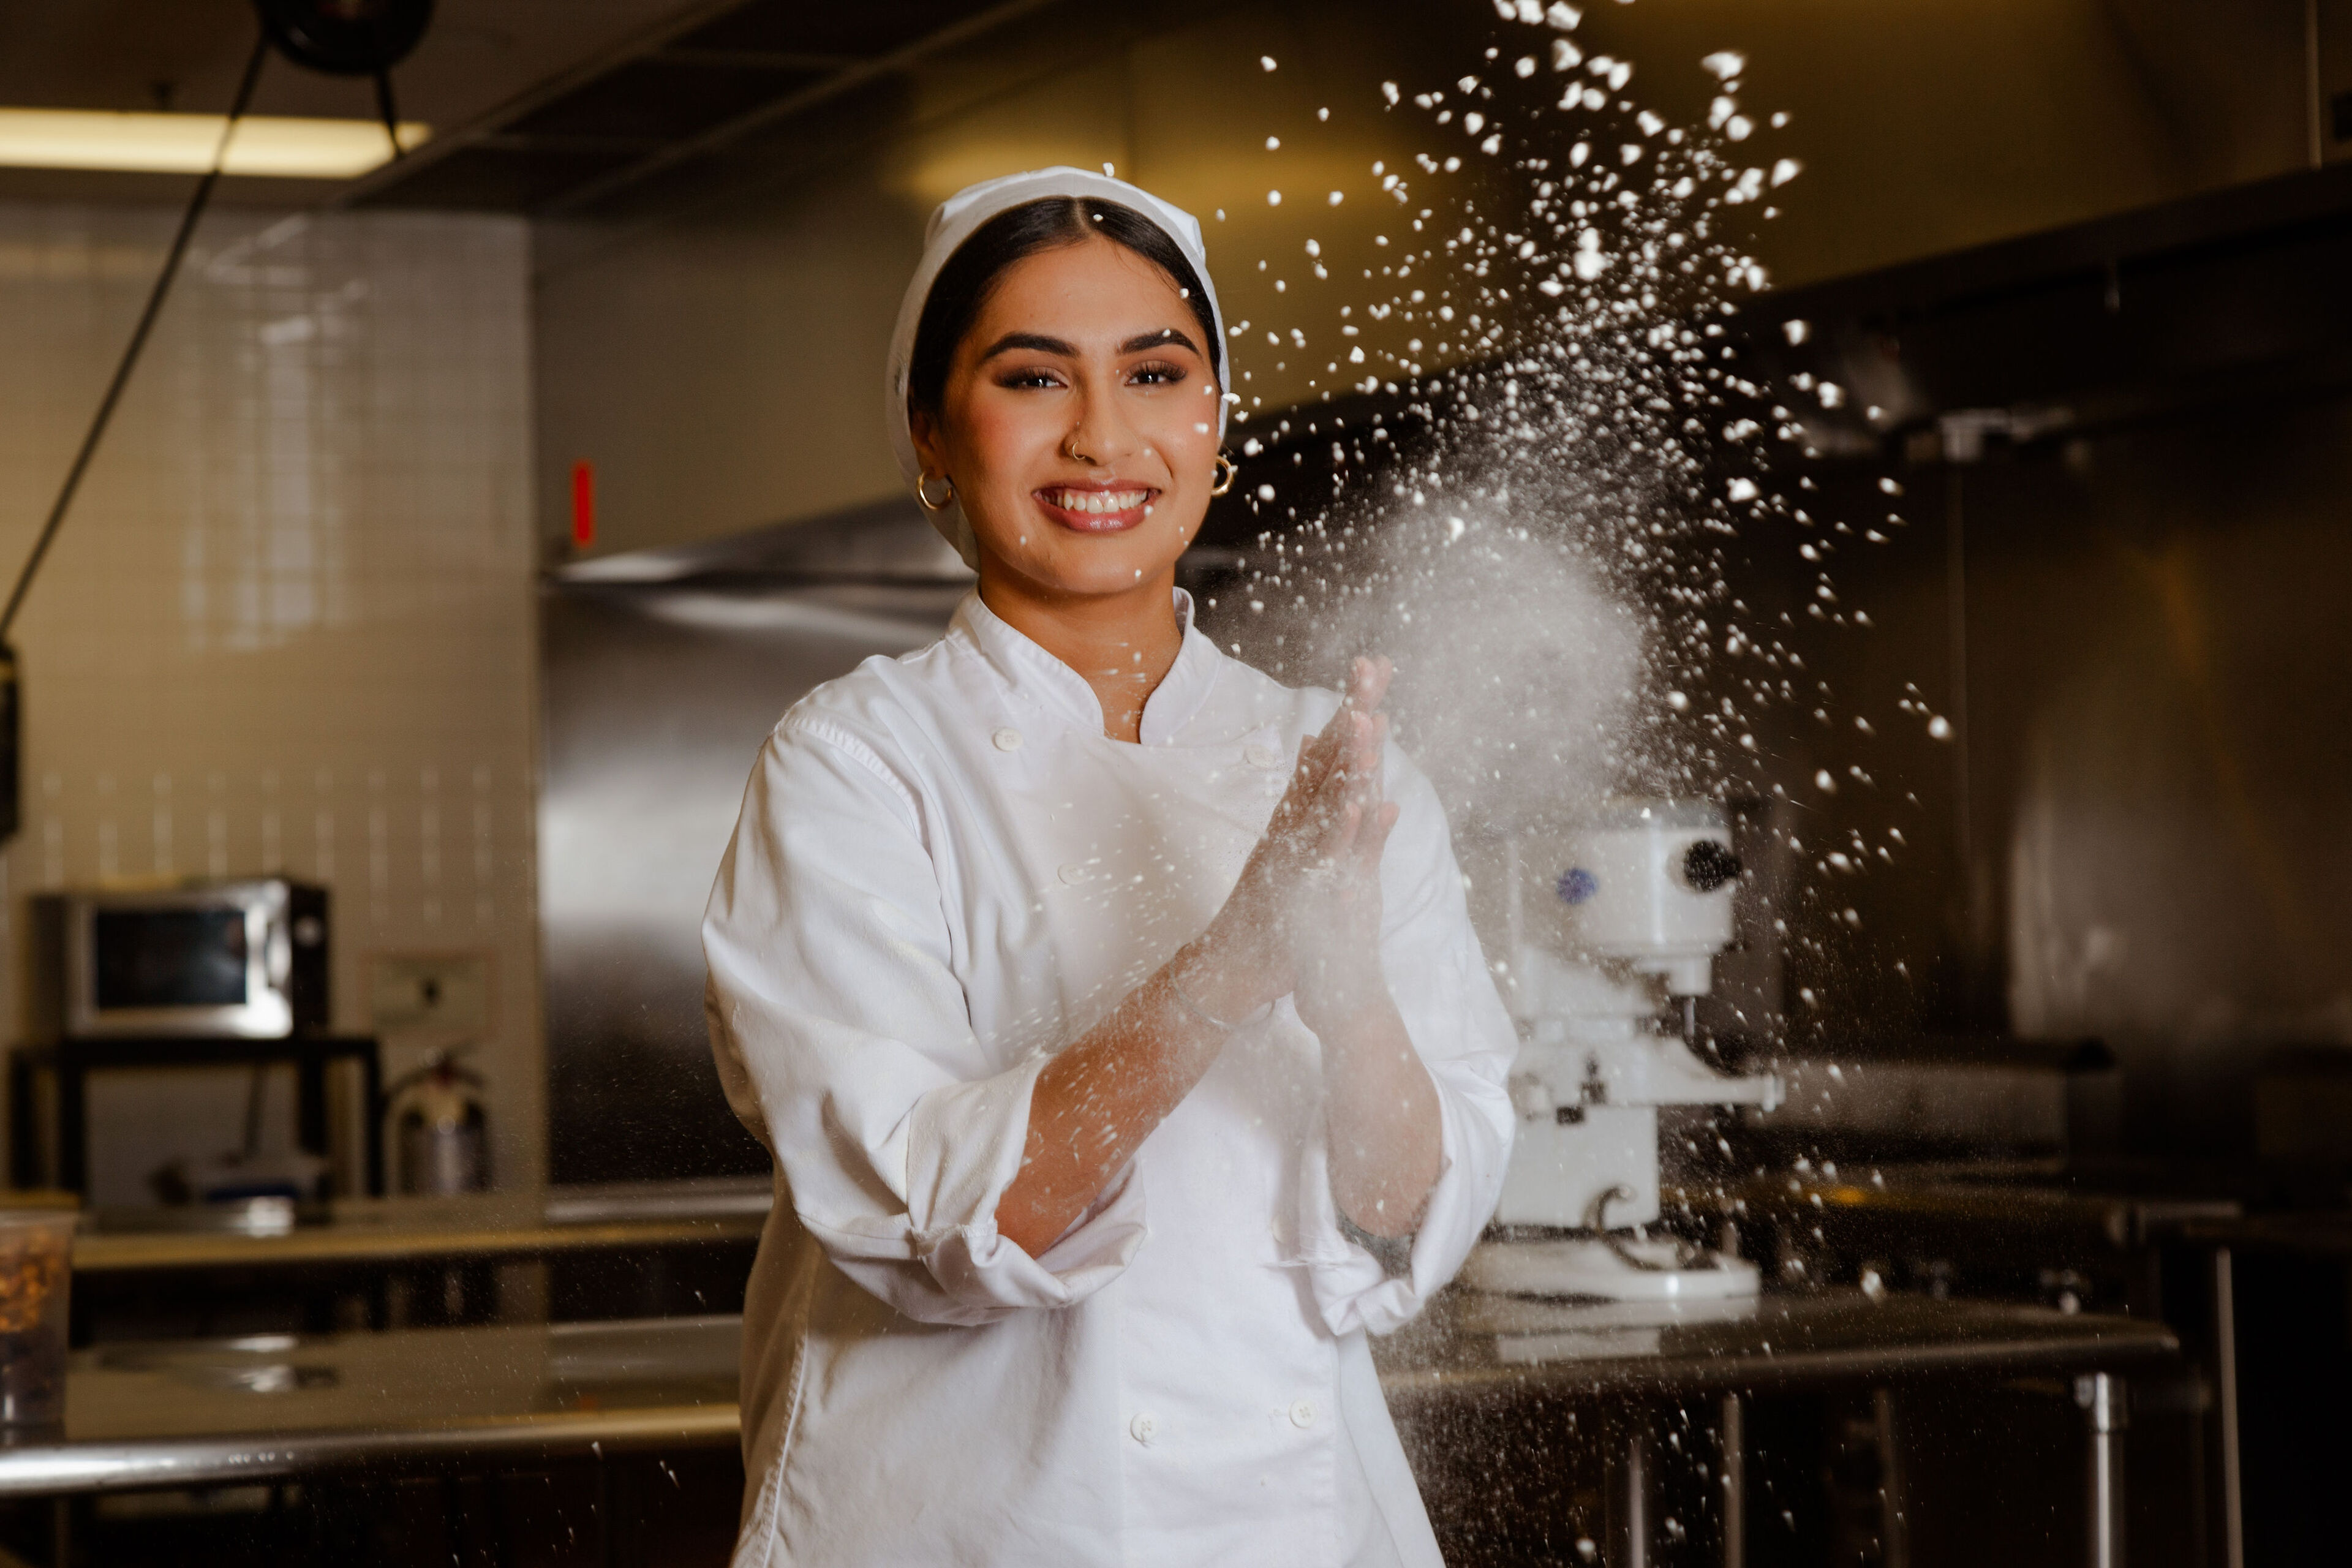 A cheerful baker in white uniform clapping hands with flour, creating a dynamic scene.